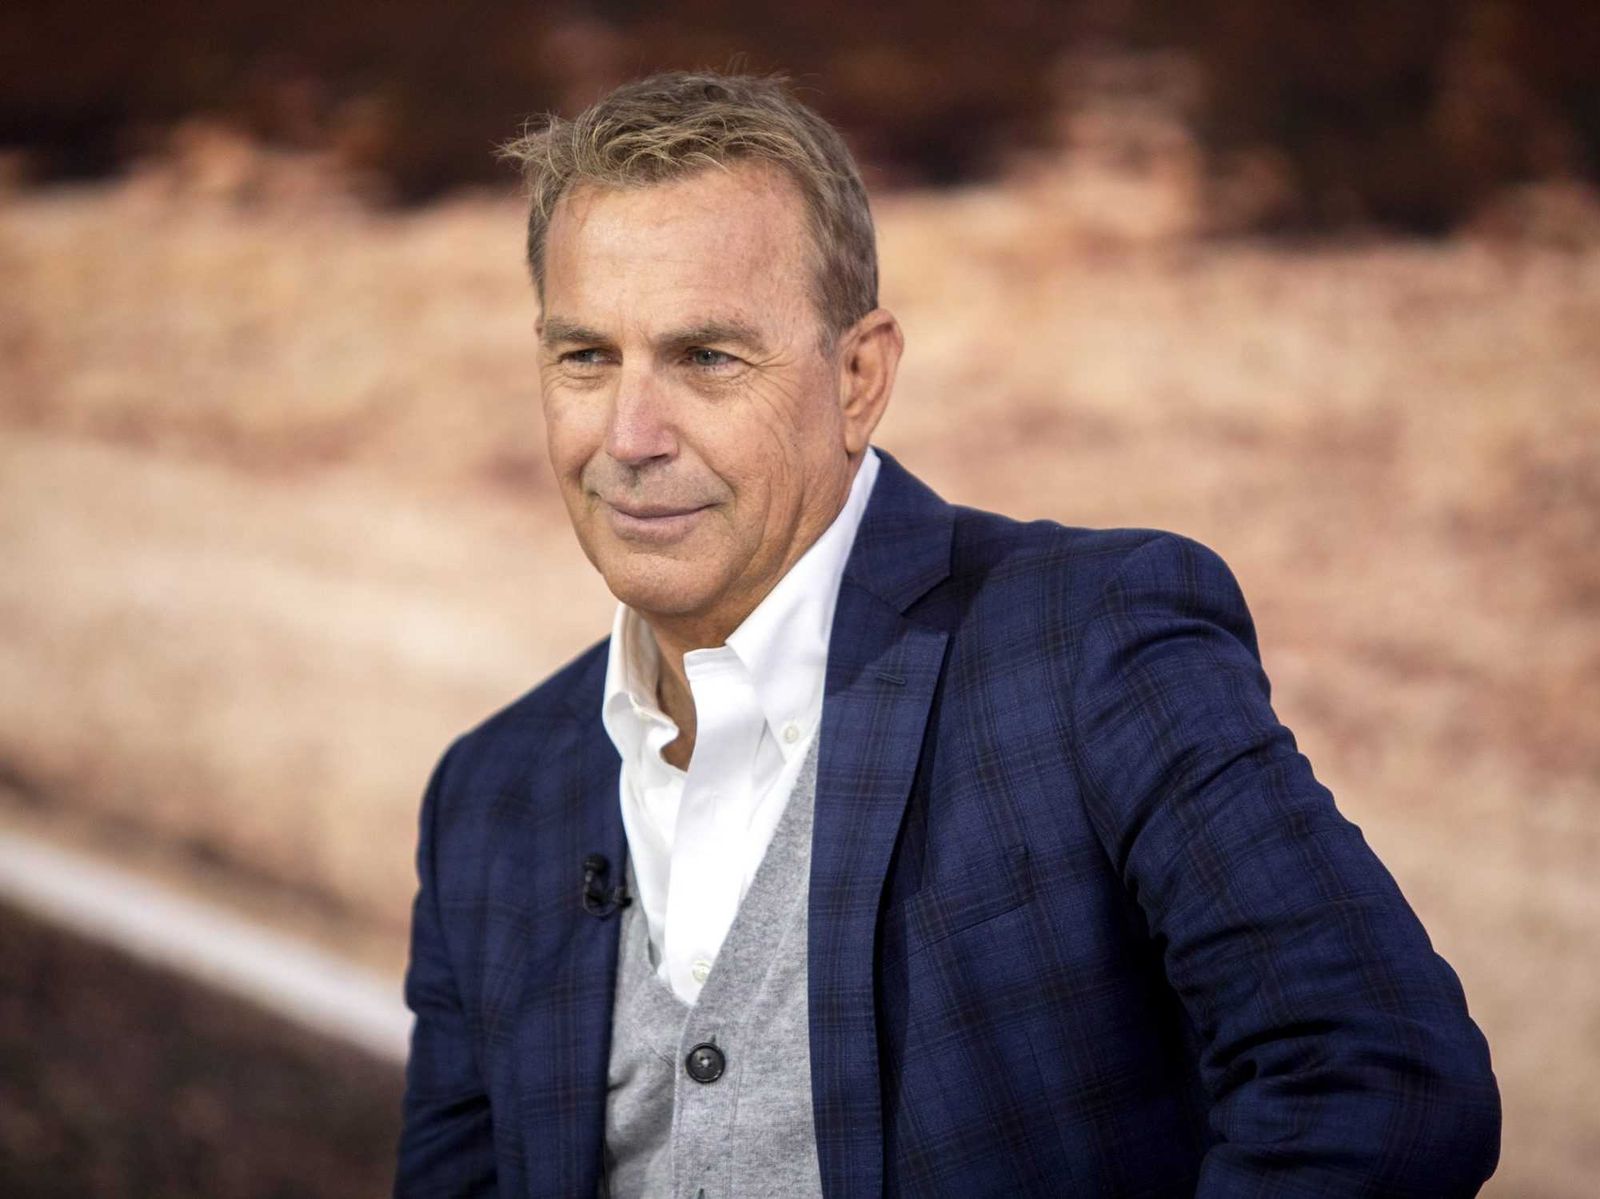 Kevin Costner's New Film 'Horizon' Stirs Up More Than Excitement Amid Divorce Drama